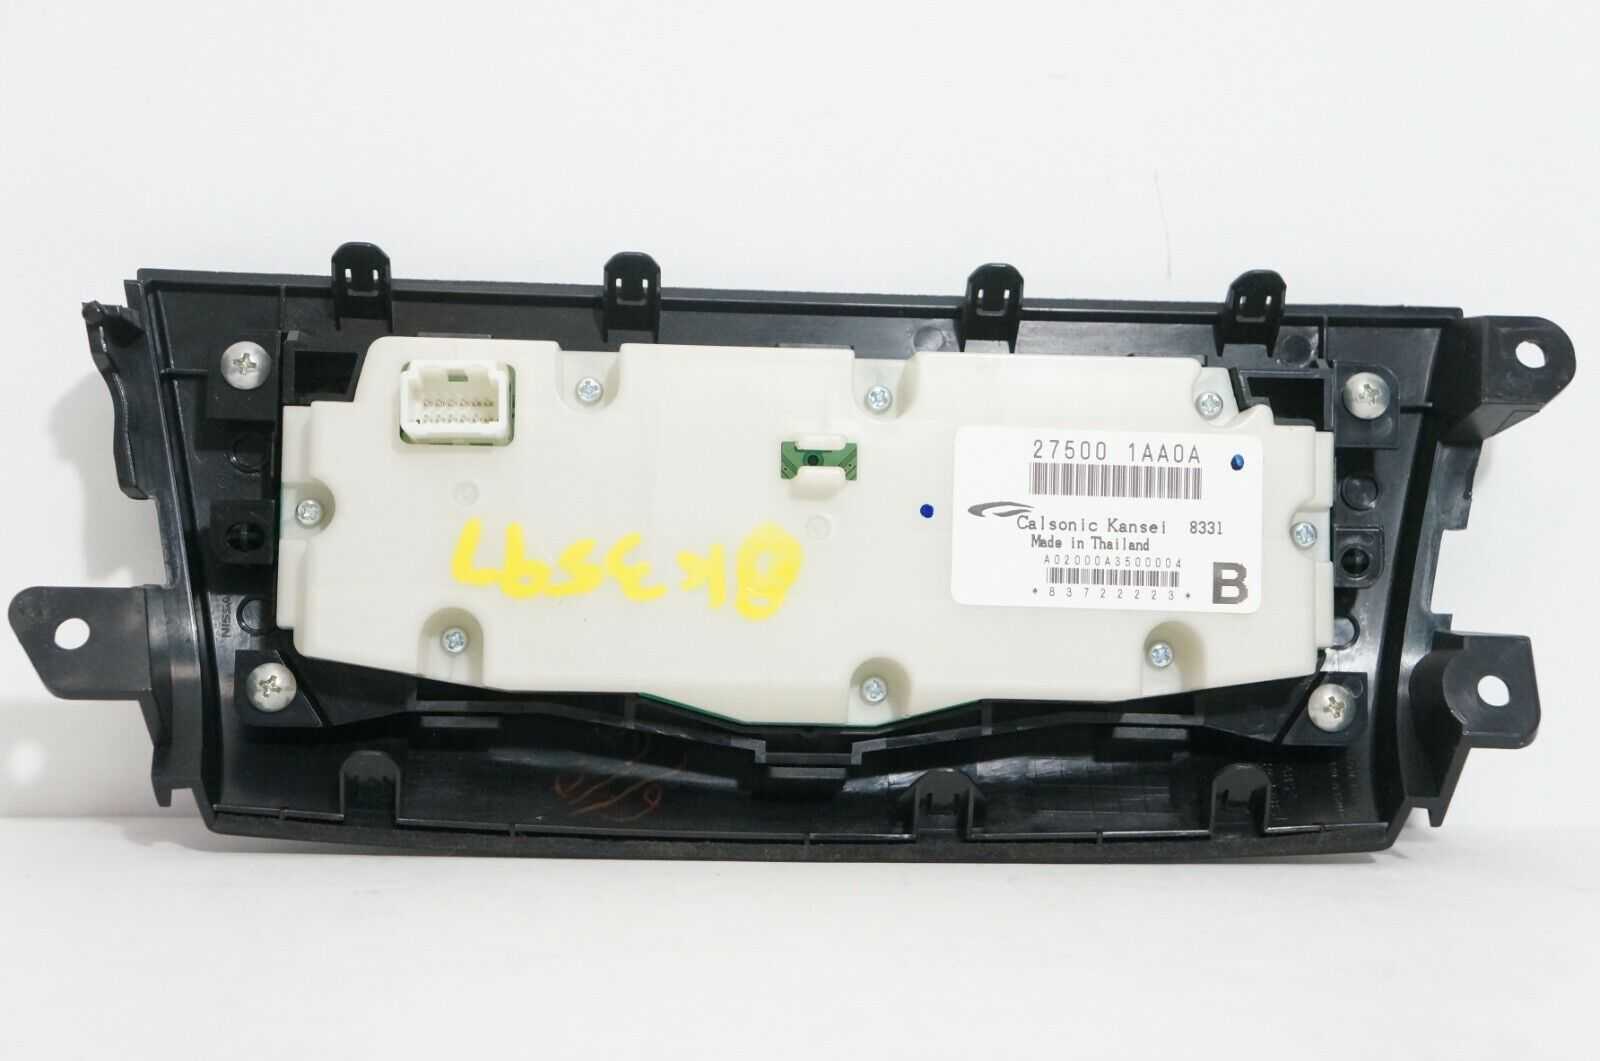 09 2009 Nissan Murano Automatic AC A/C Heater Control OEM 27500-1AA0A Alshned Auto Parts